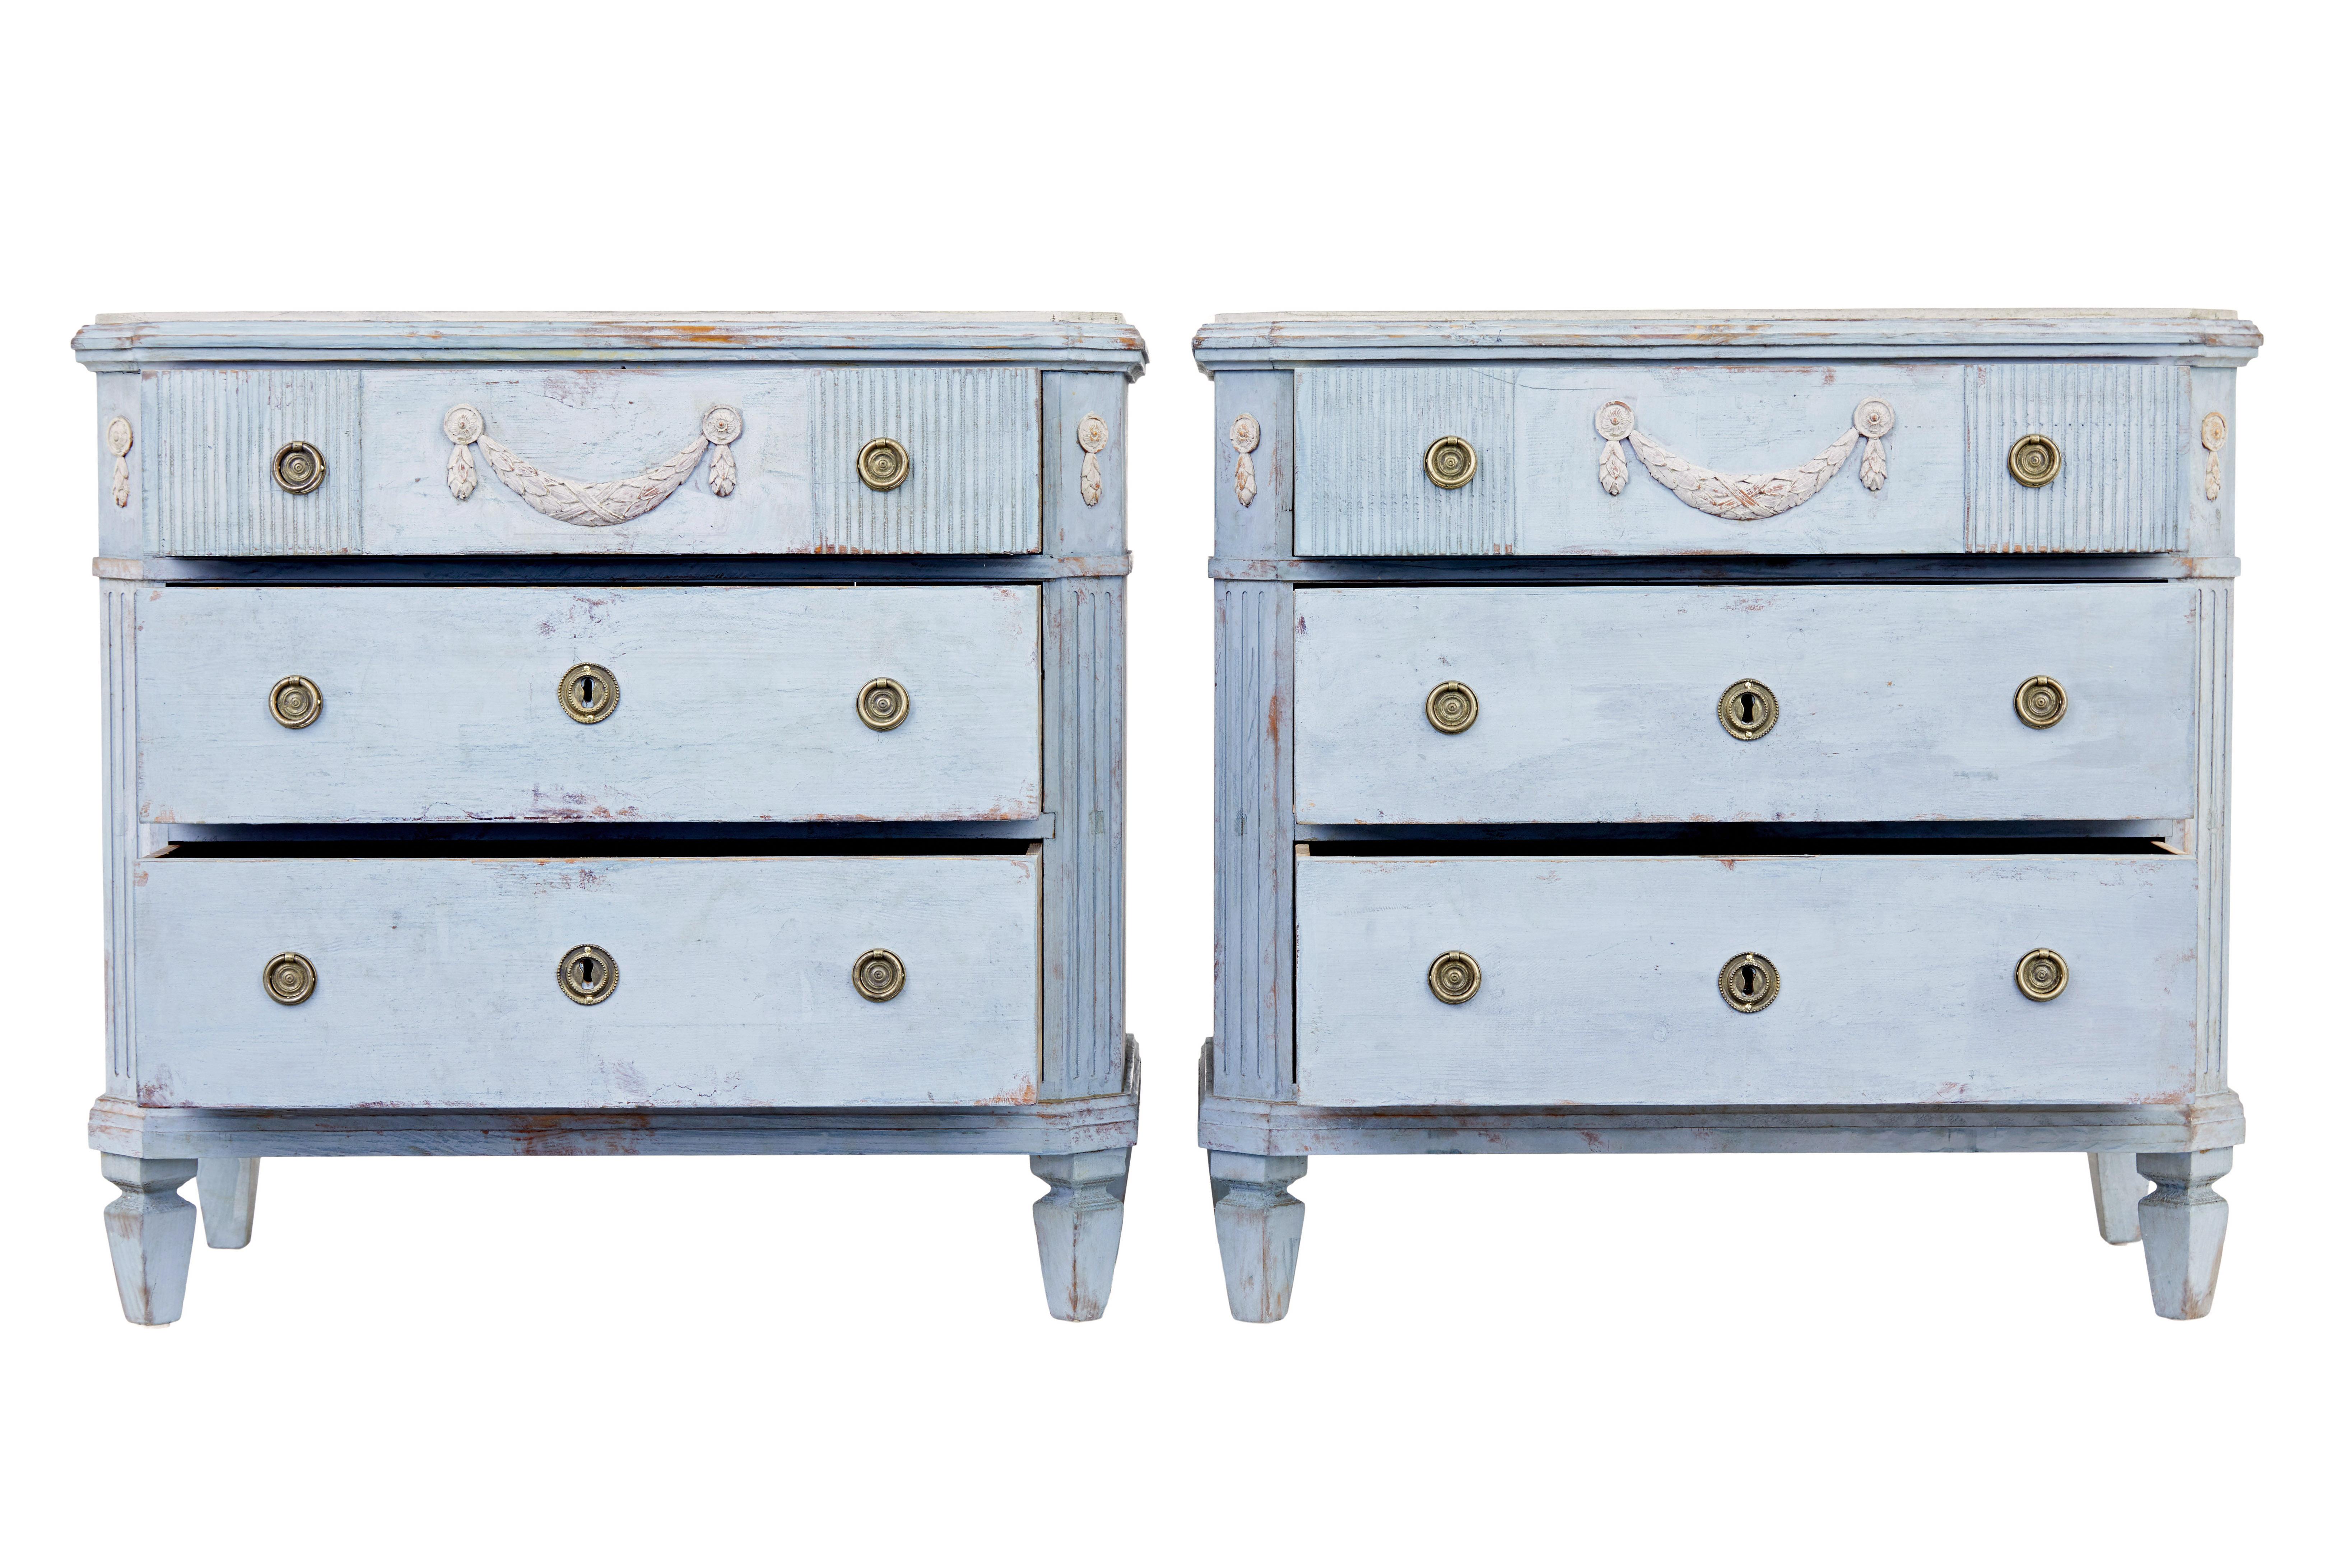 Pair of 19th century carved Swedish painted chest of drawers circa 1880.

Beautiful pair of swedish 3 drawer commodes, very much in the gustavian taste.

Presented in a light warm blue, with contrasting grey top surfaces.  Plain grey top surface